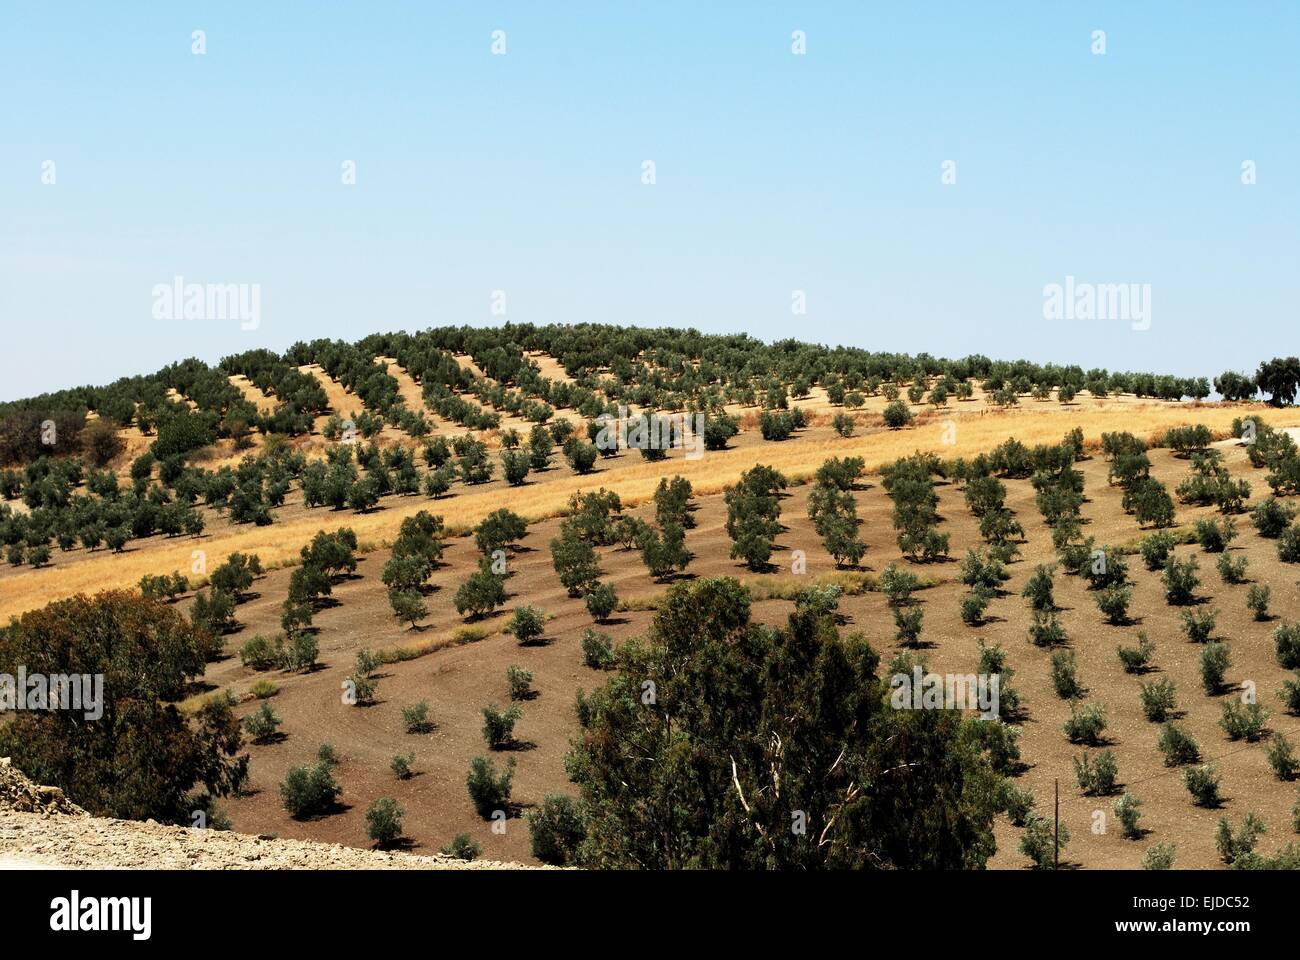 Olive groves on rolling hills in the Spanish countryside, Montilla, Cordoba Province, Andalusia, Spain, Western Europe. Stock Photo